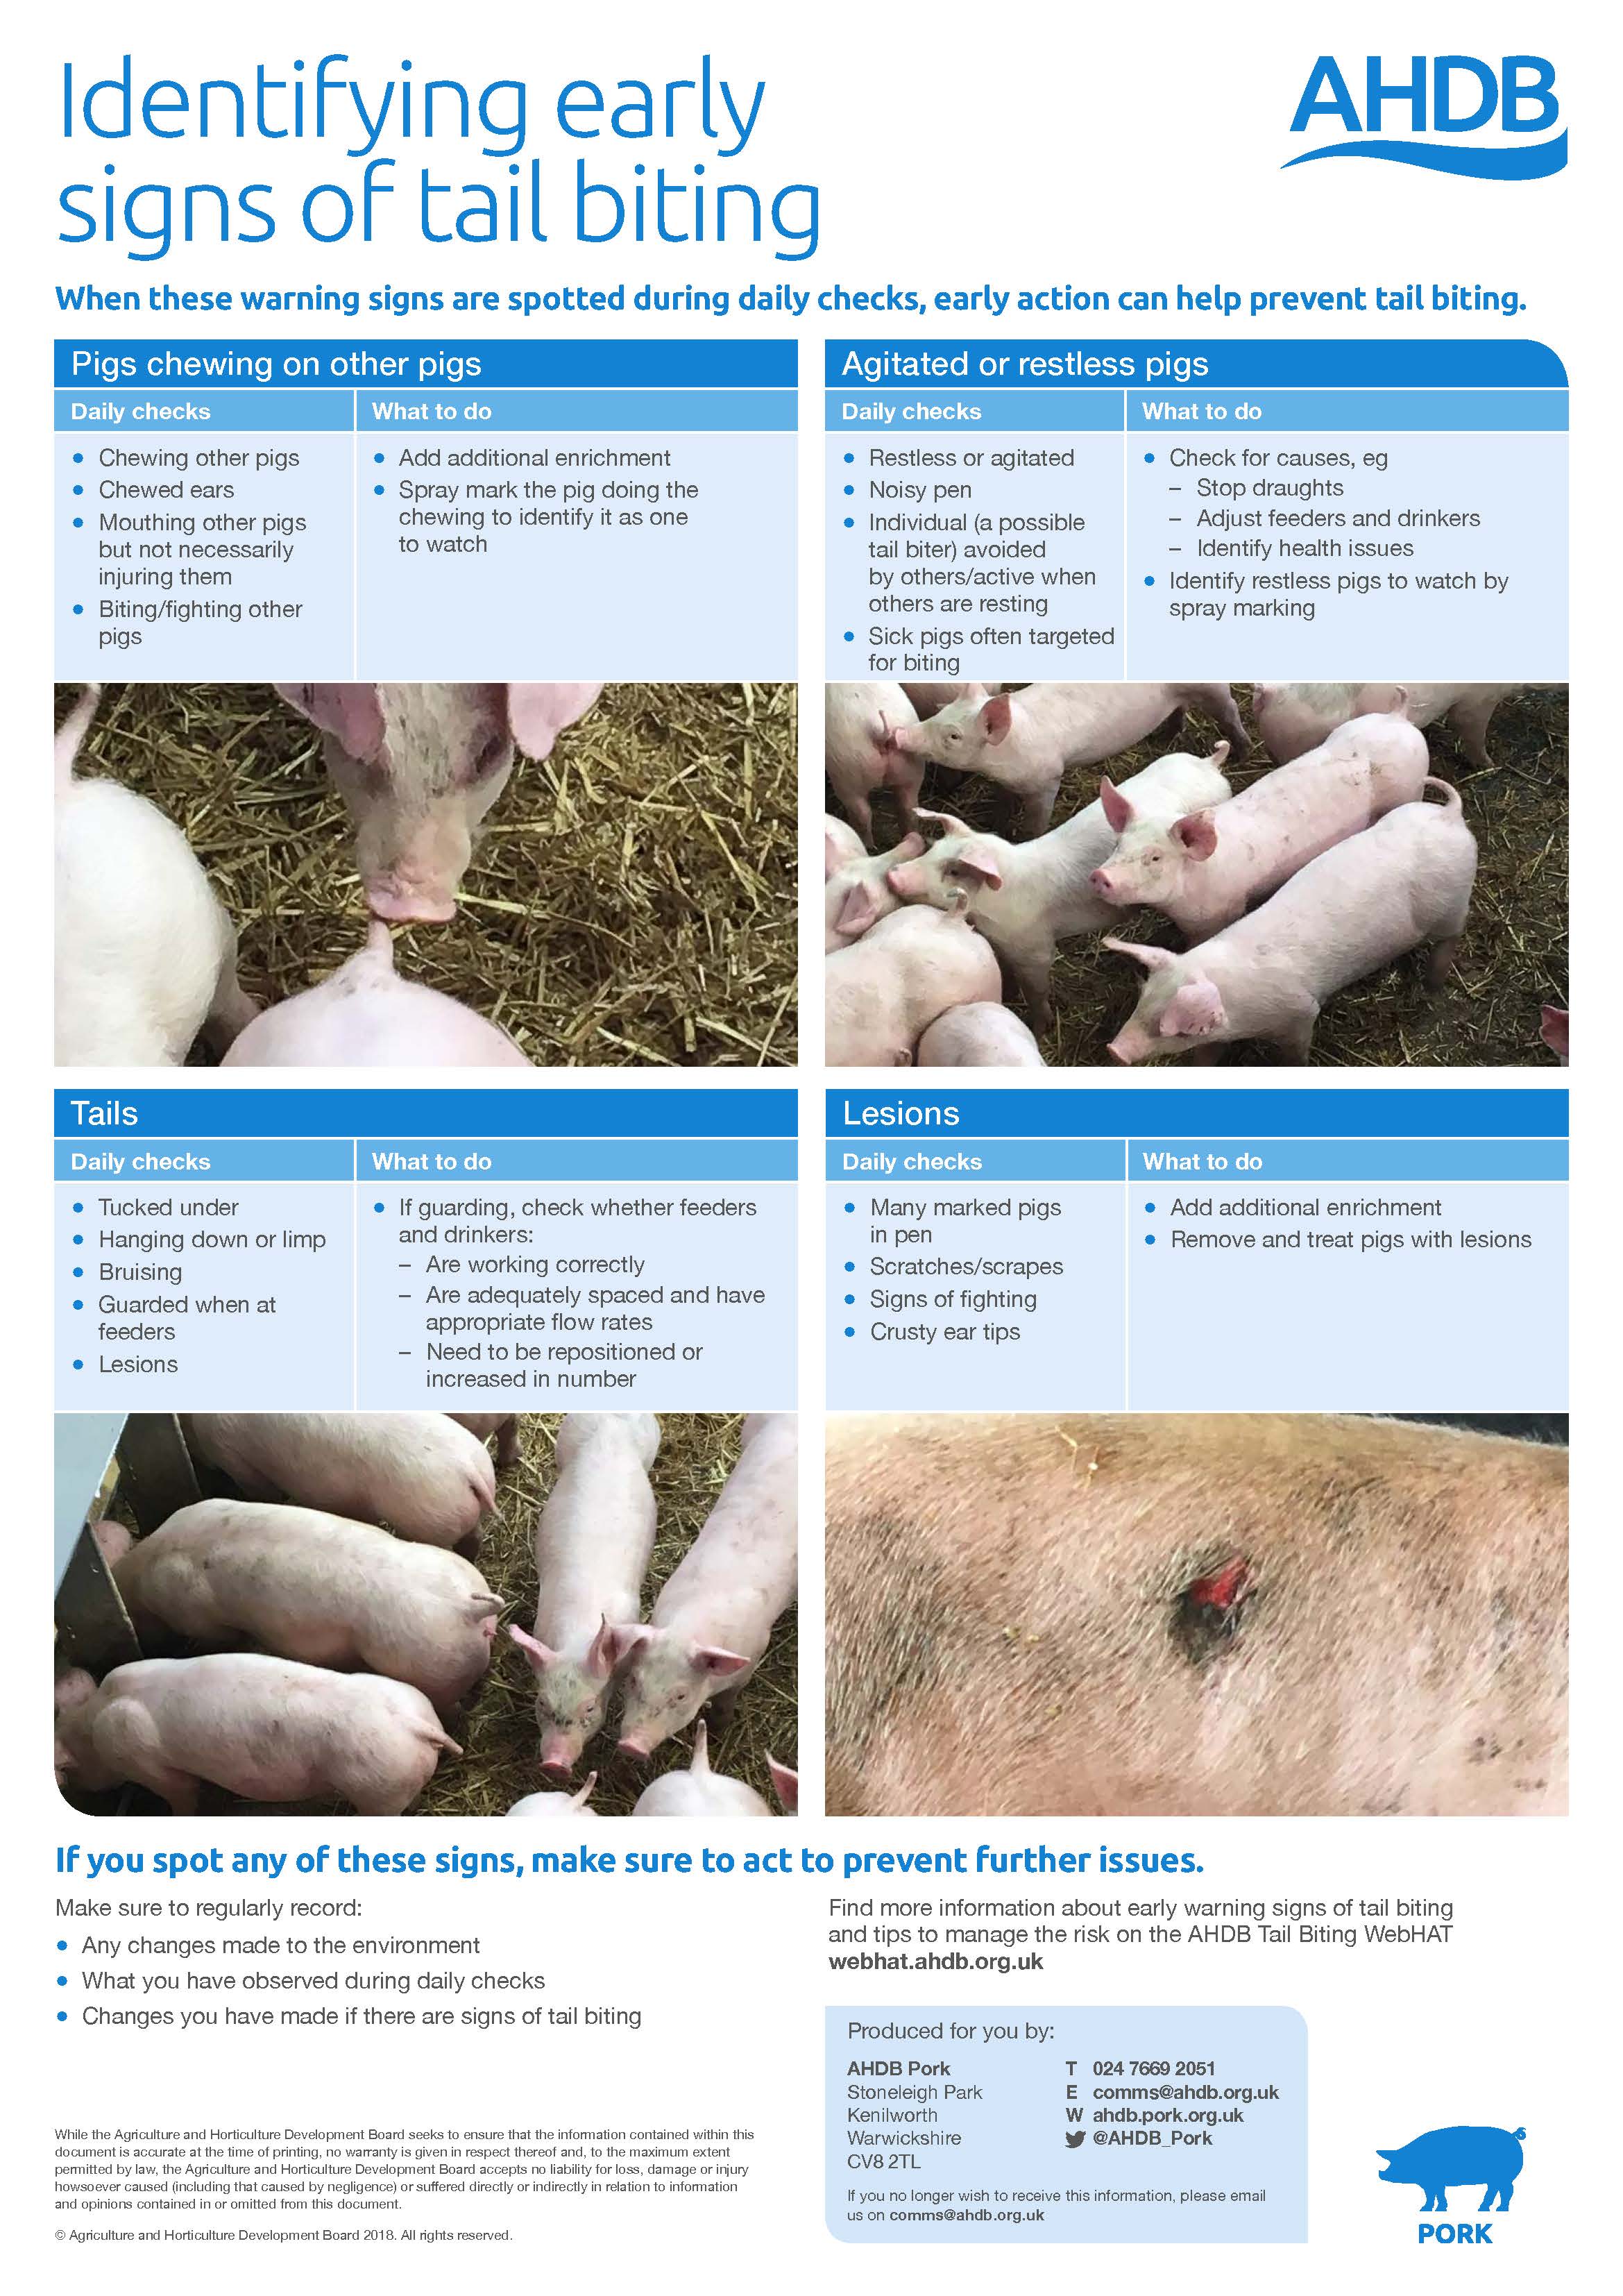 Poster showing how to identify the early signs of tail biting 